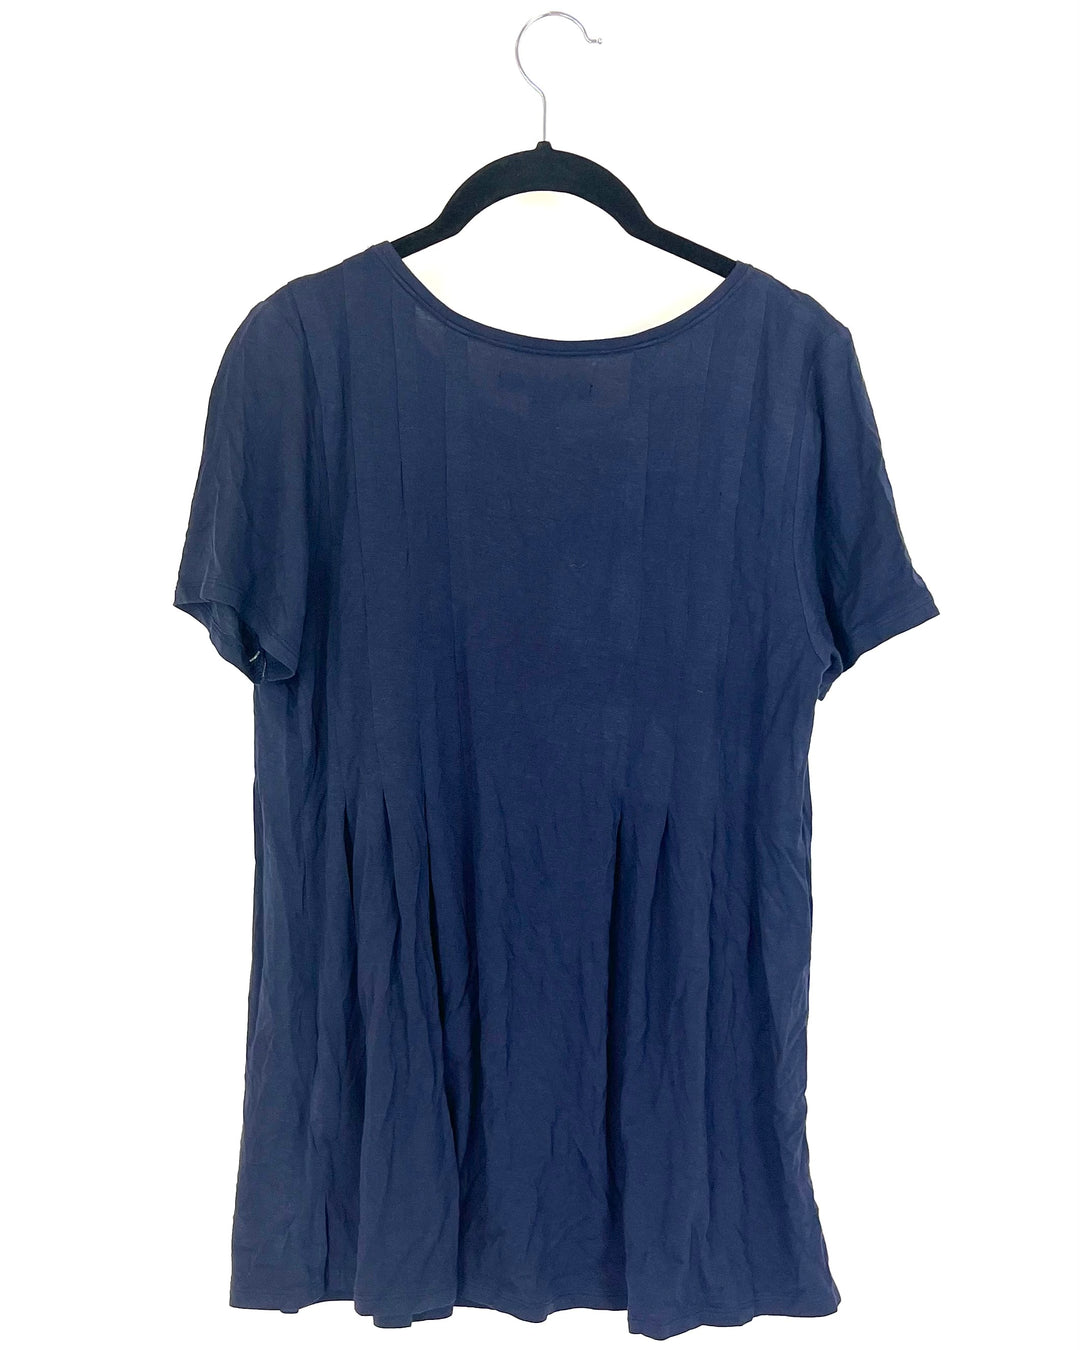 Navy Blue Short Sleeve Nightgown - Size 6/8